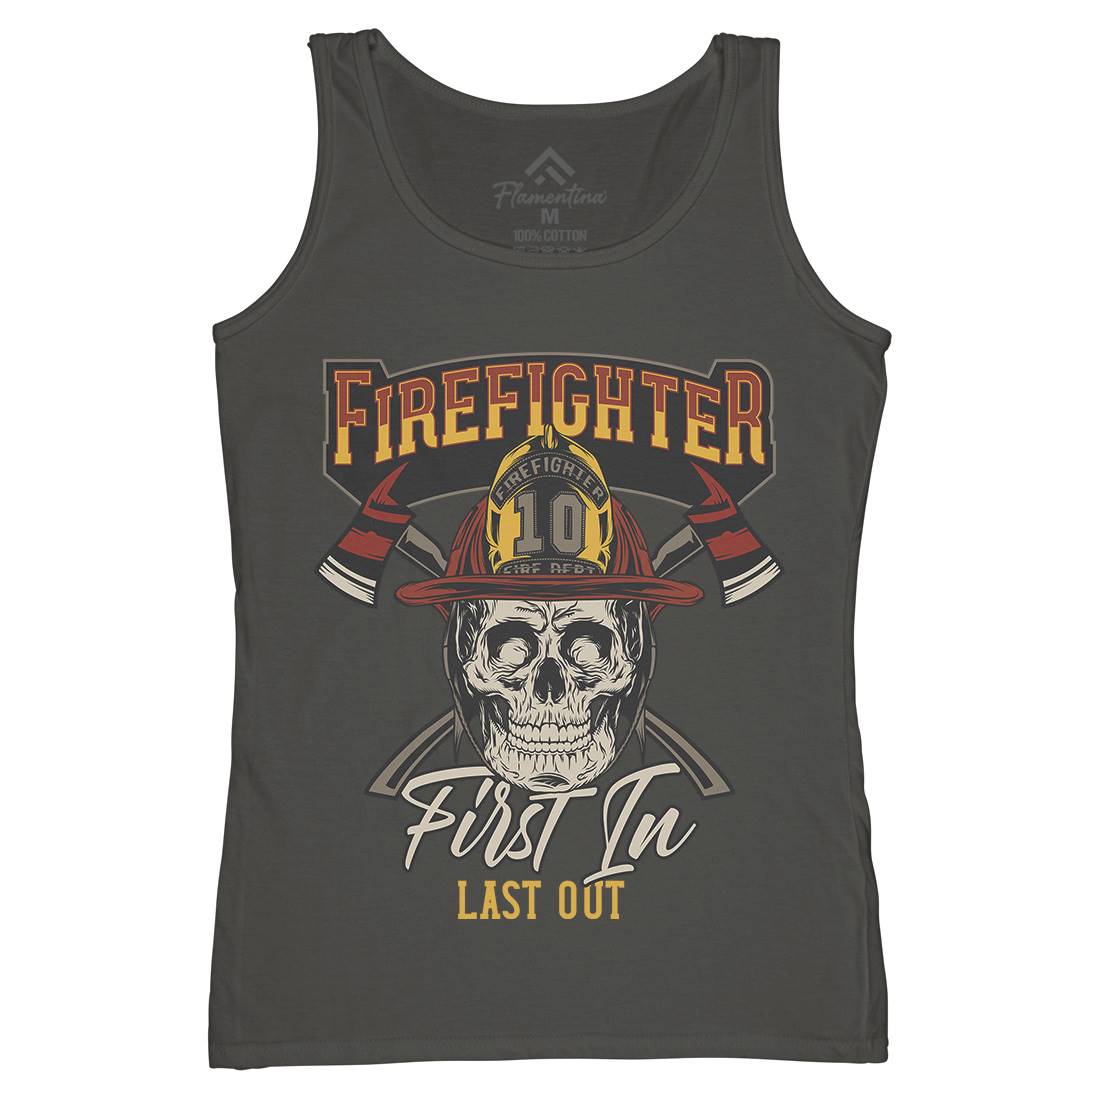 First In Last Out Womens Organic Tank Top Vest Firefighters D933